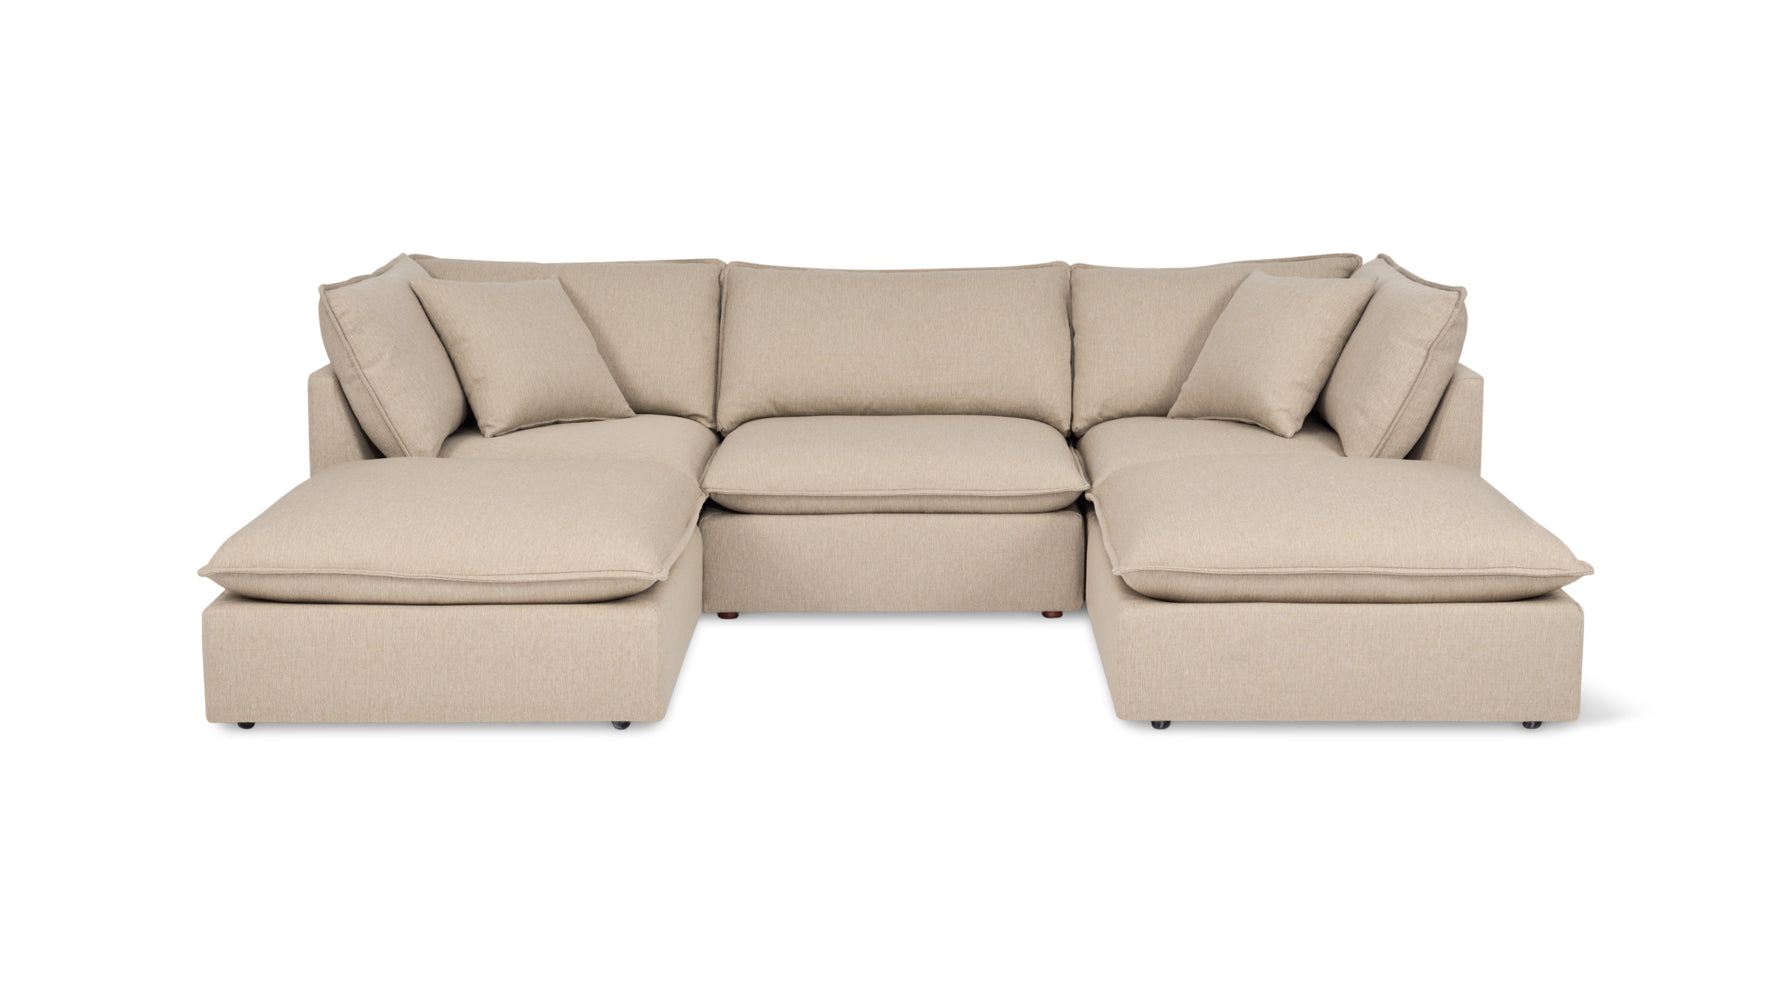 Chill Time 5-Piece Modular U-Shaped Sectional, Biscuit - Image 1